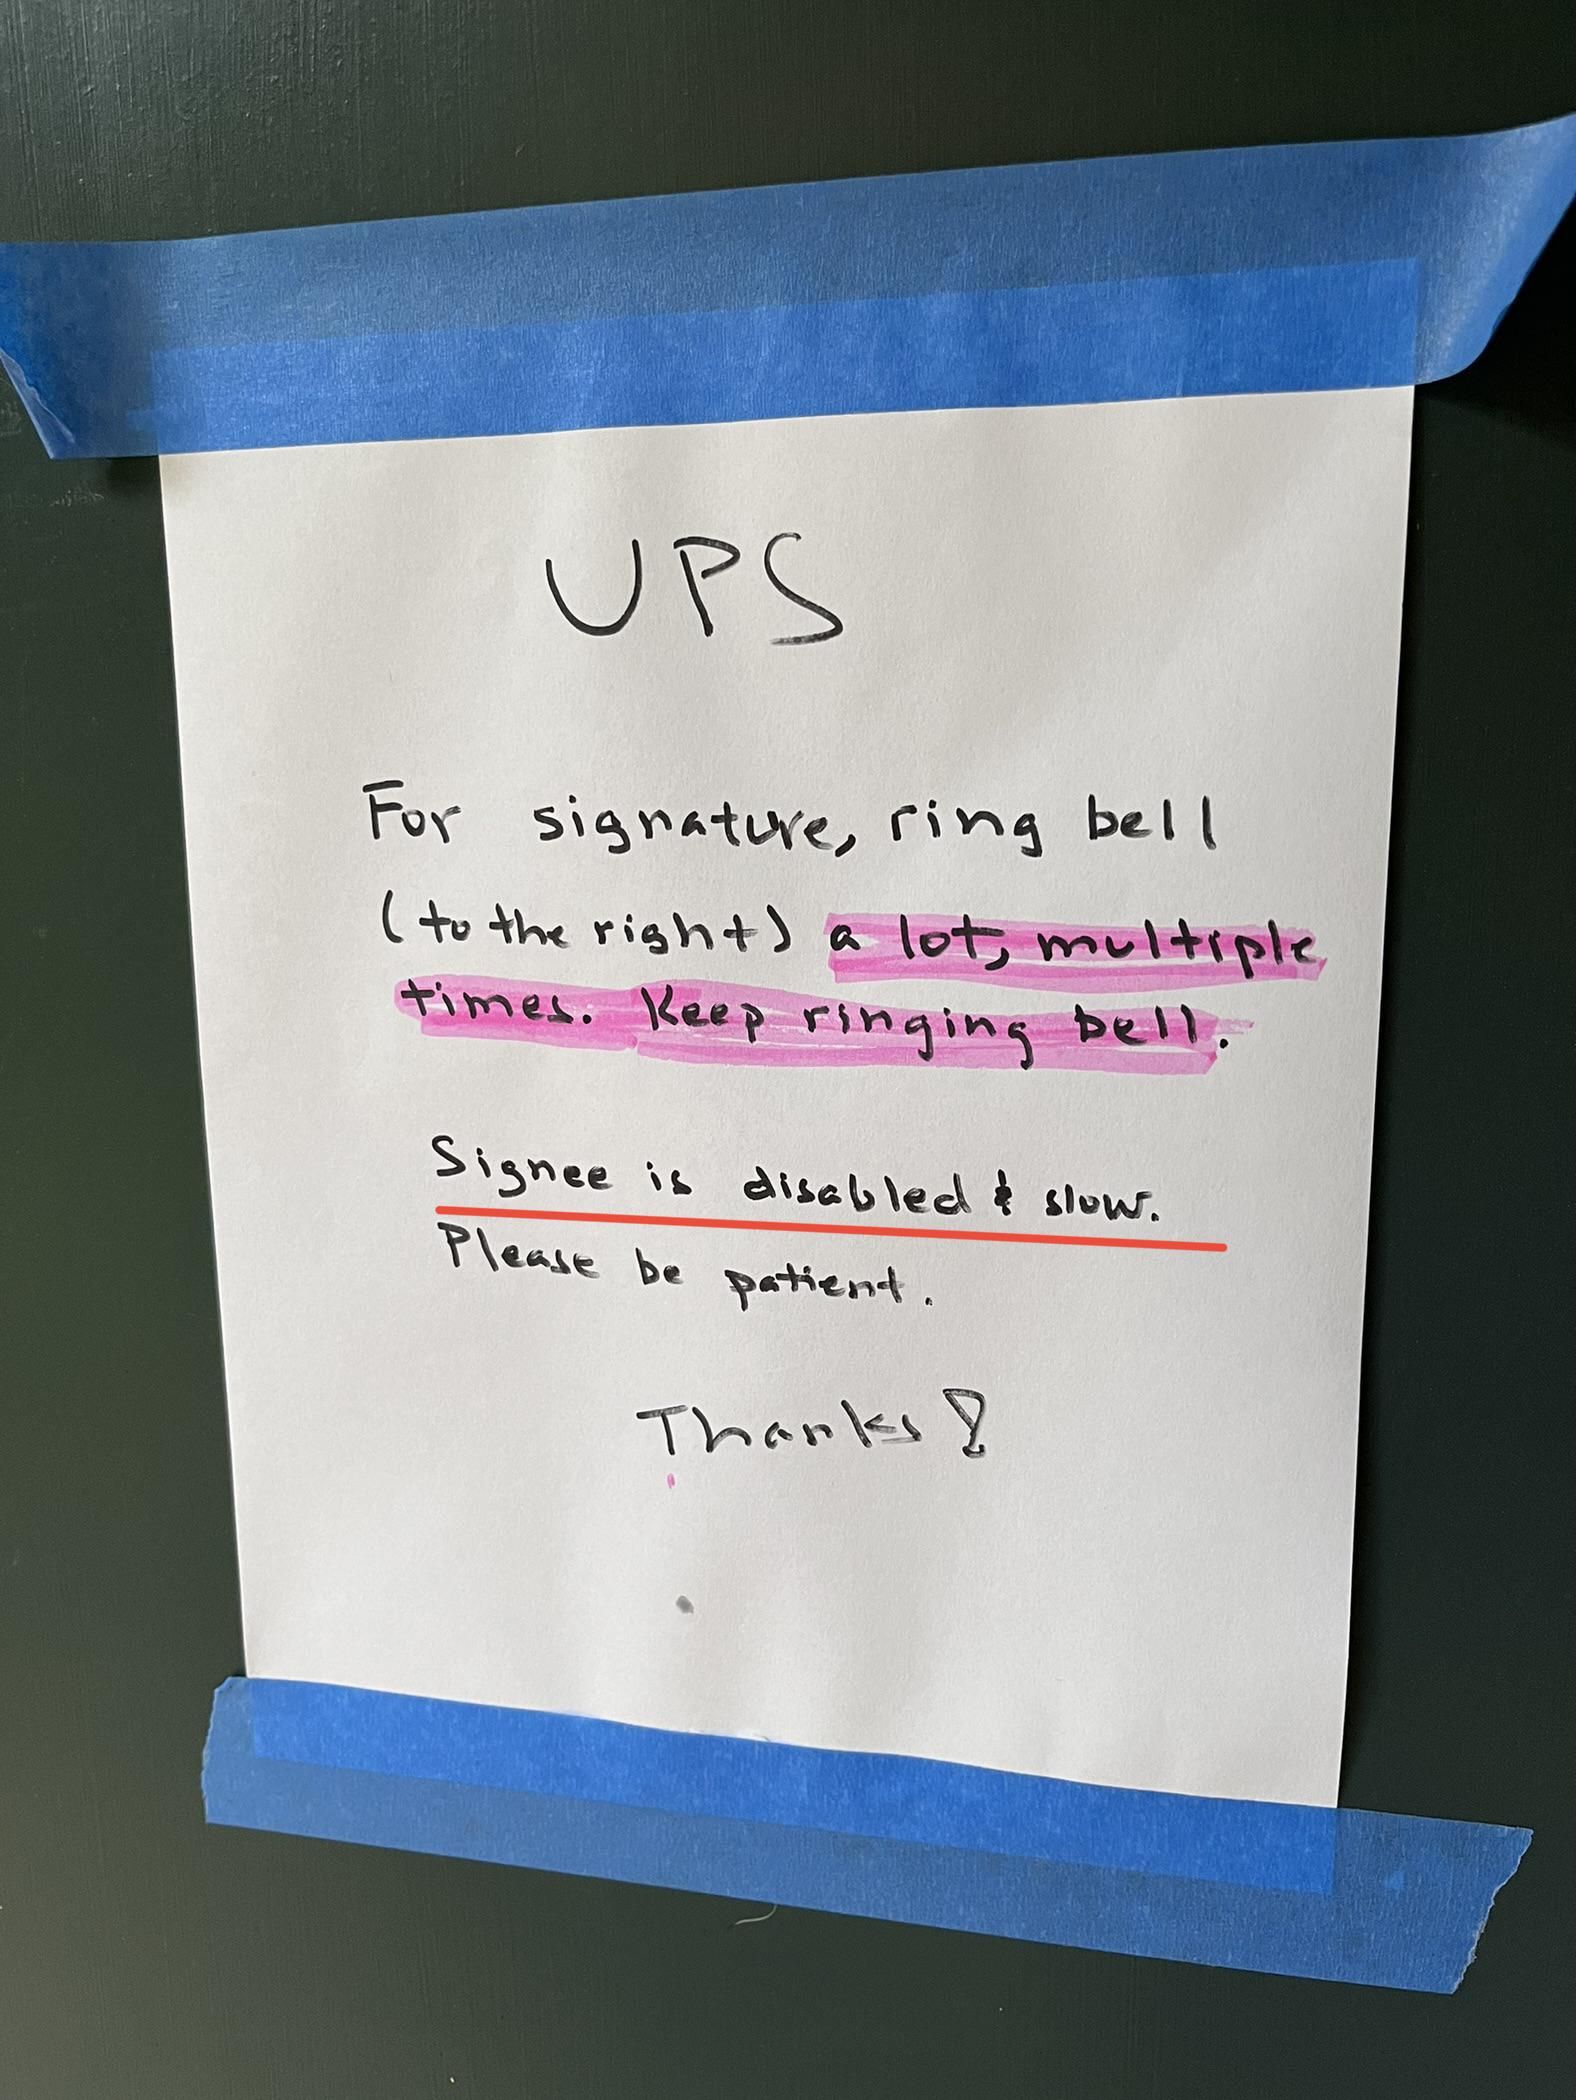 I work from home, so my dad wanted me to sign for his package. Found this sign outside our door after I signed. For the record, I am not disabled.